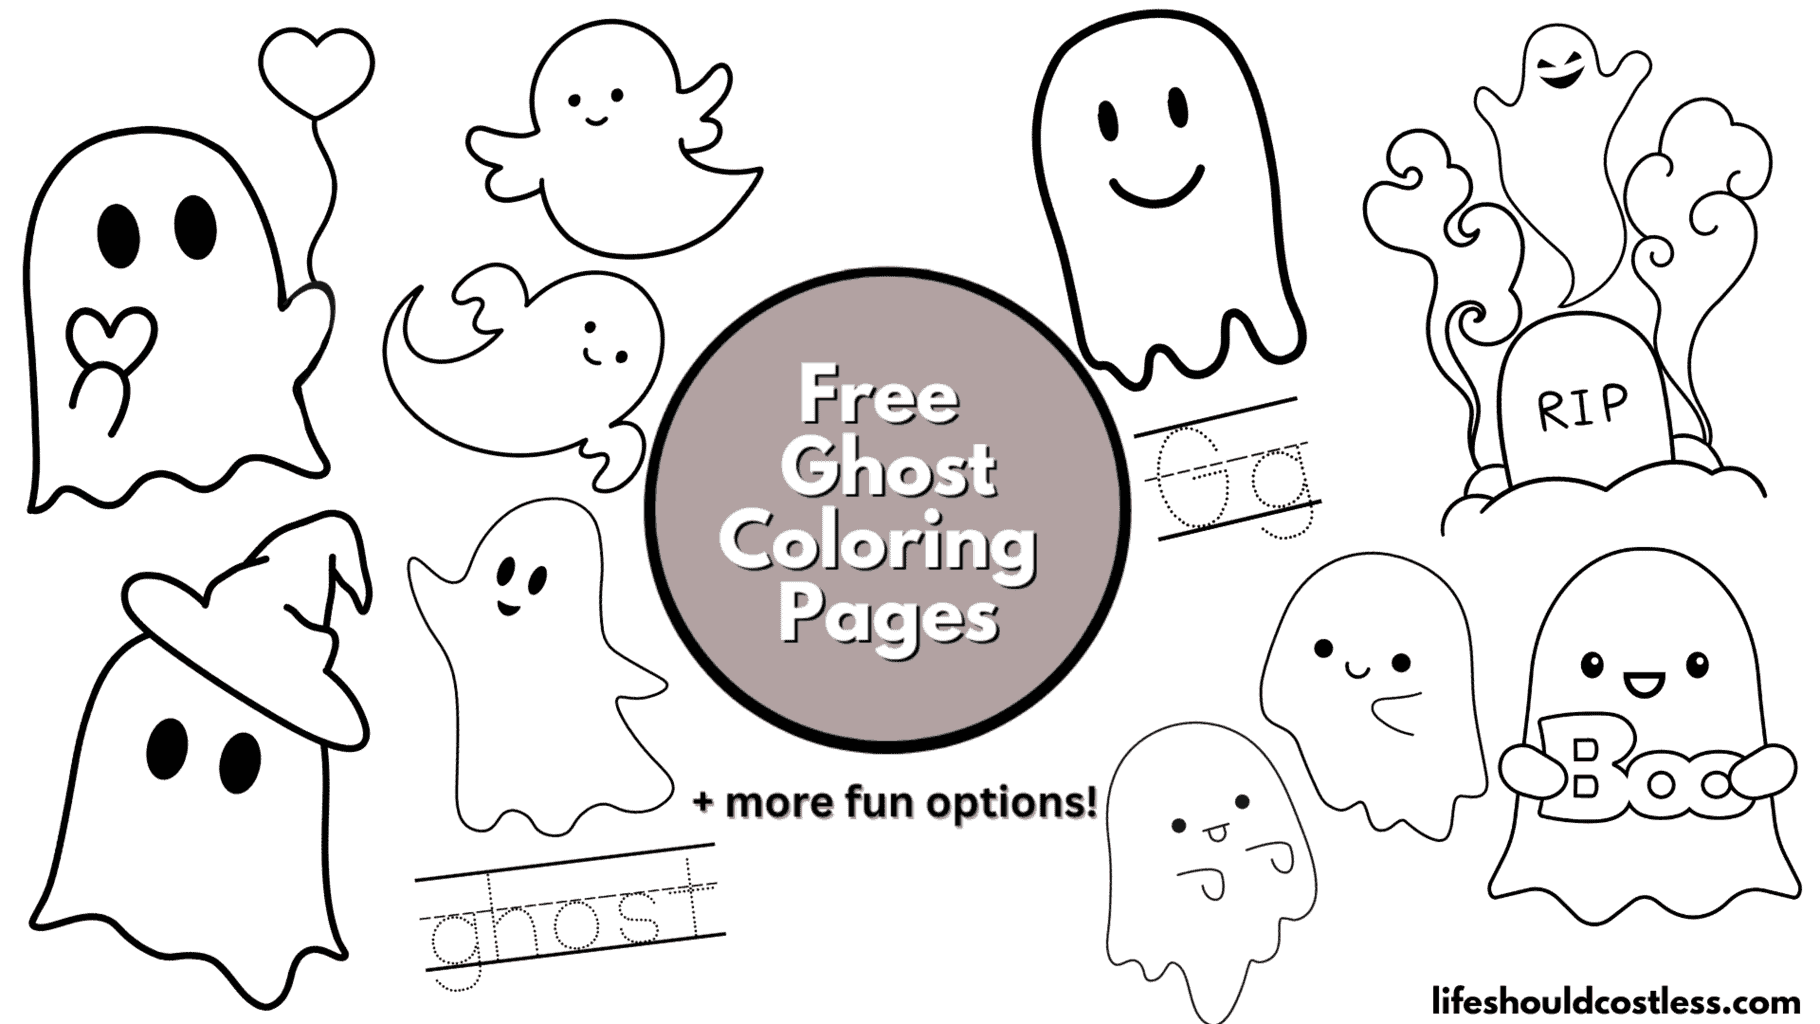 Ghost coloring pages free printable pdf templates